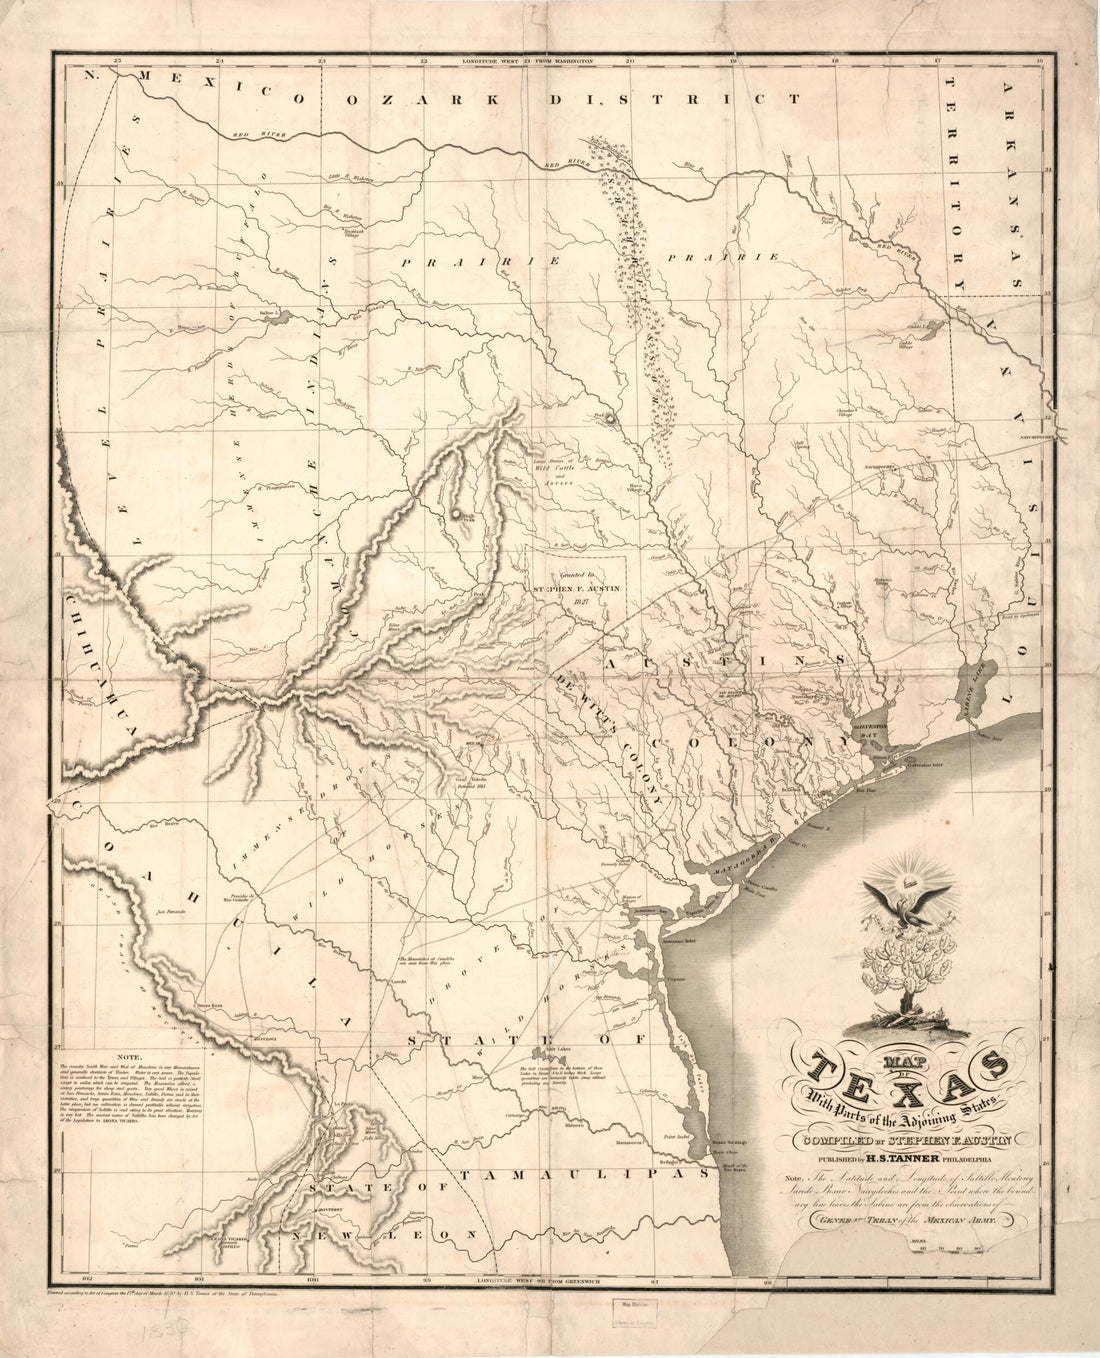 This old map of Map of Texas With Parts of the Adjoining States from 1830 was created by Stephen F. (Stephen Fuller) Austin, Henry Schenck Tanner in 1830